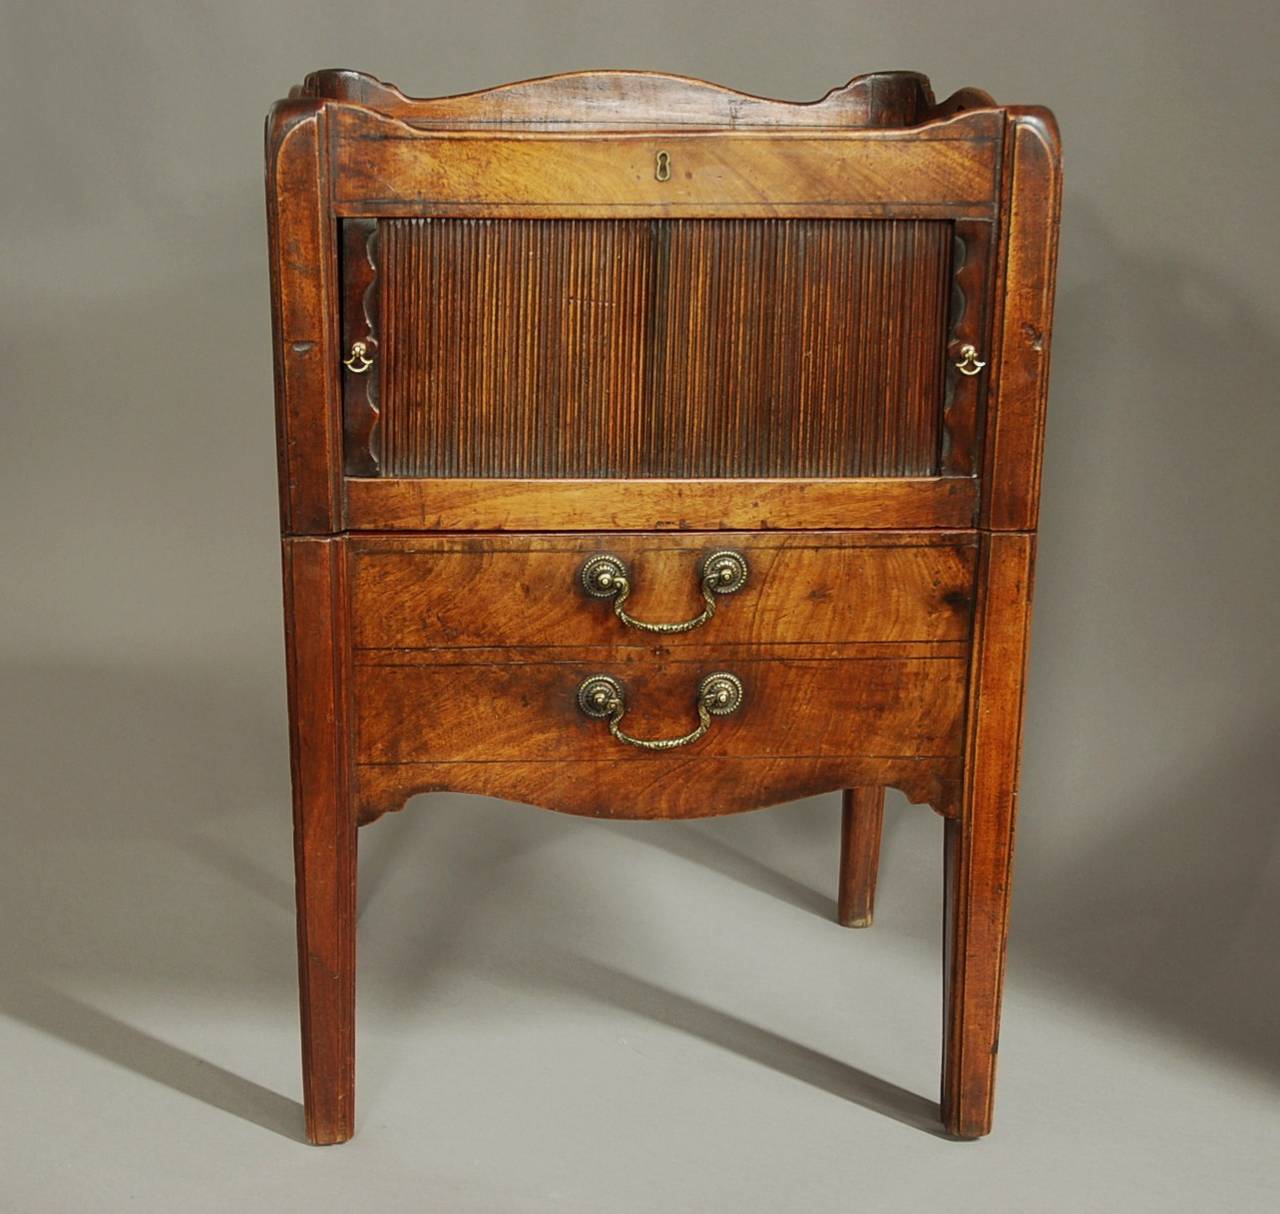 A late 18th century mahogany night table of superb patina.

This piece consists of a shaped and pierced gallery to the top supporting a finely figured solid mahogany top of superb patina (color).

The top front rail has an escutcheon but this is